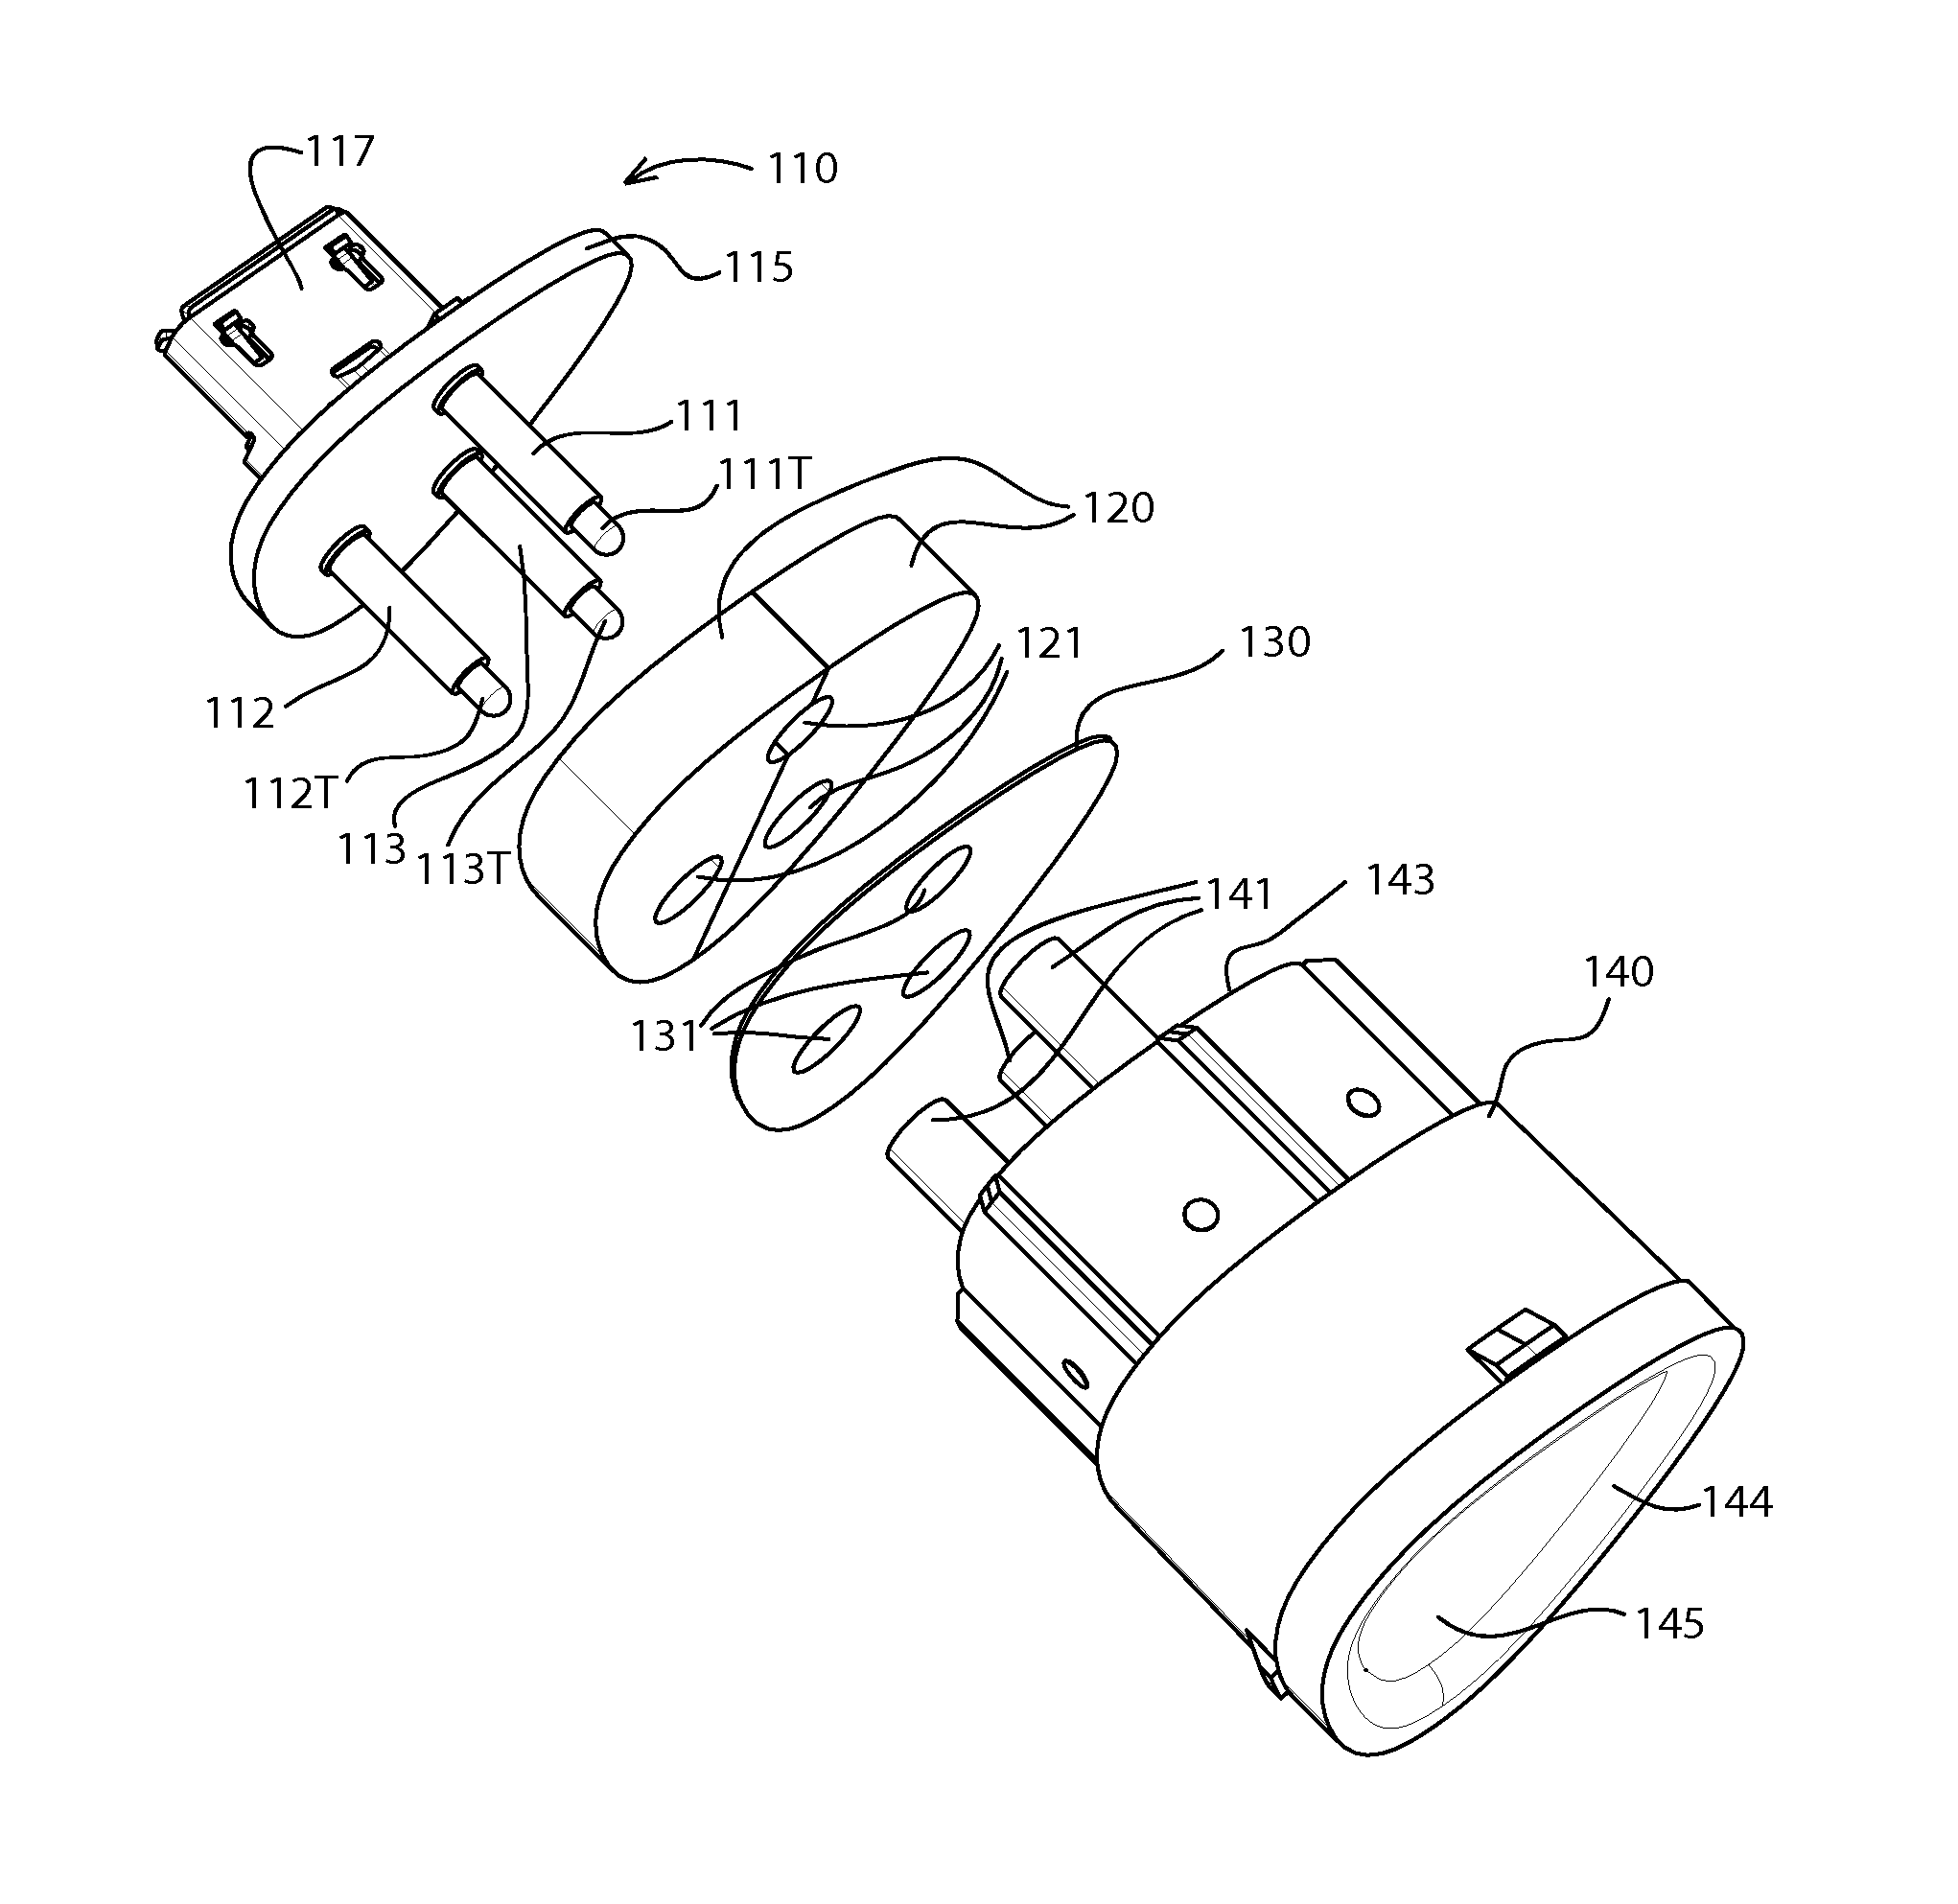 Battery charger device and method